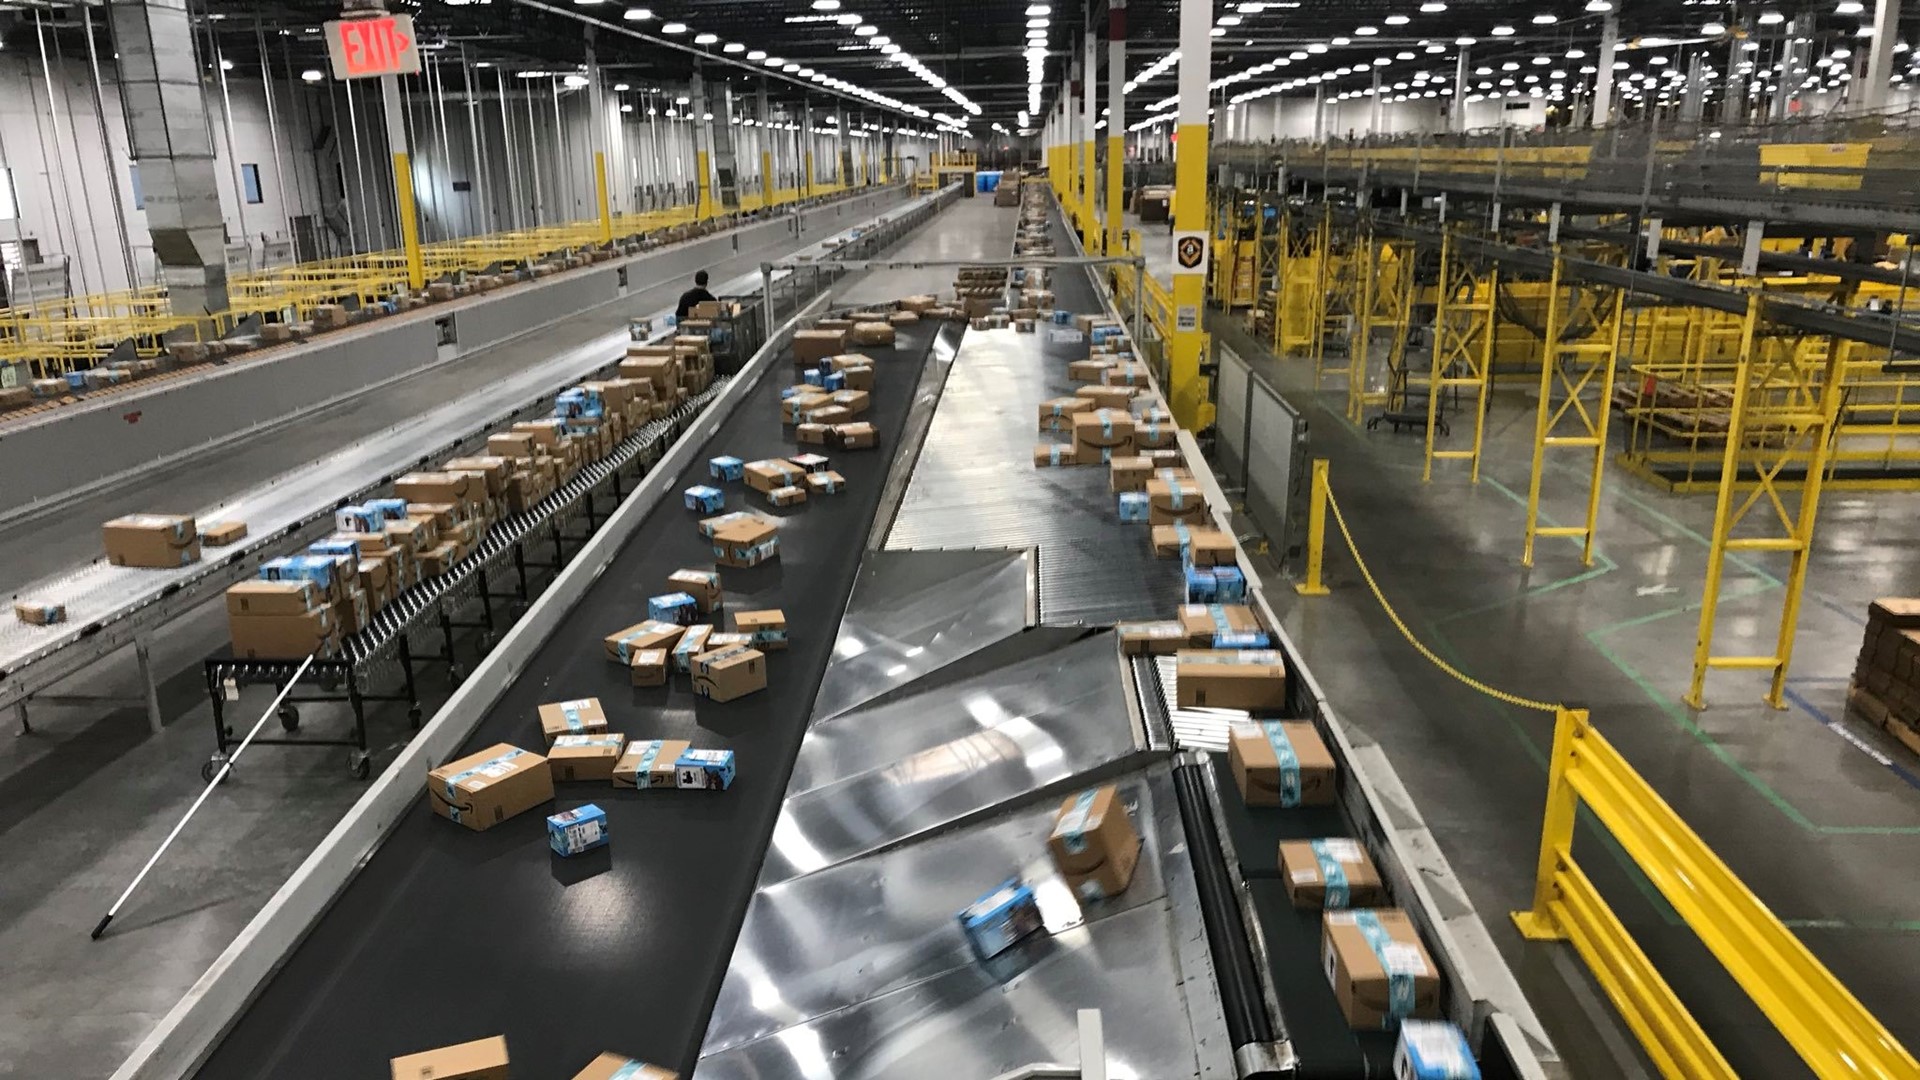 Amazon is seeking to fulfill hundreds of positions at their Turlock site.